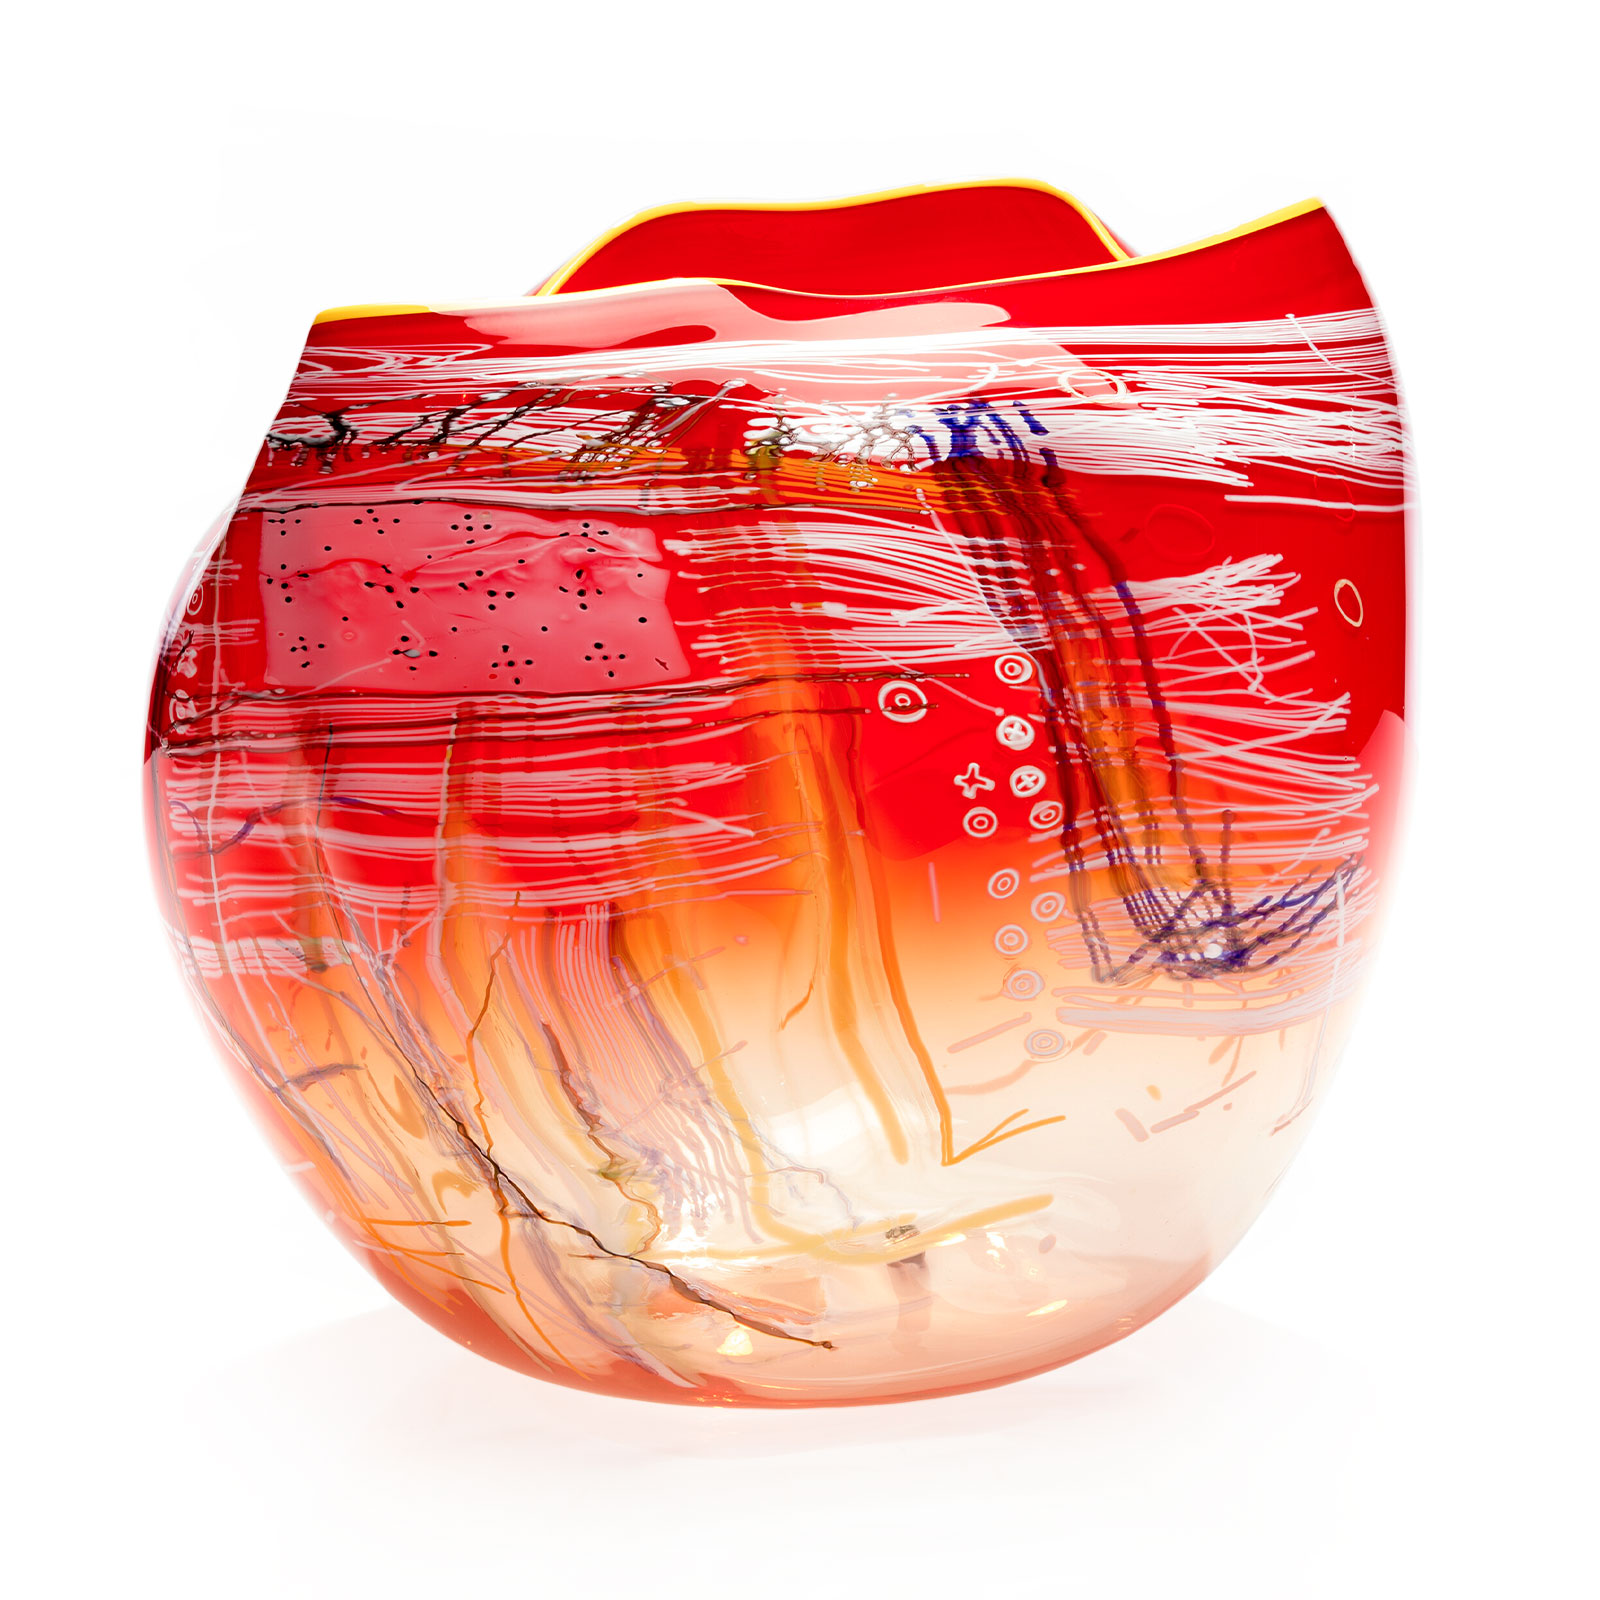 Sunset Red Soft Cylinder with Yellow Lip Wrap, 2016 by Dale Chihuly